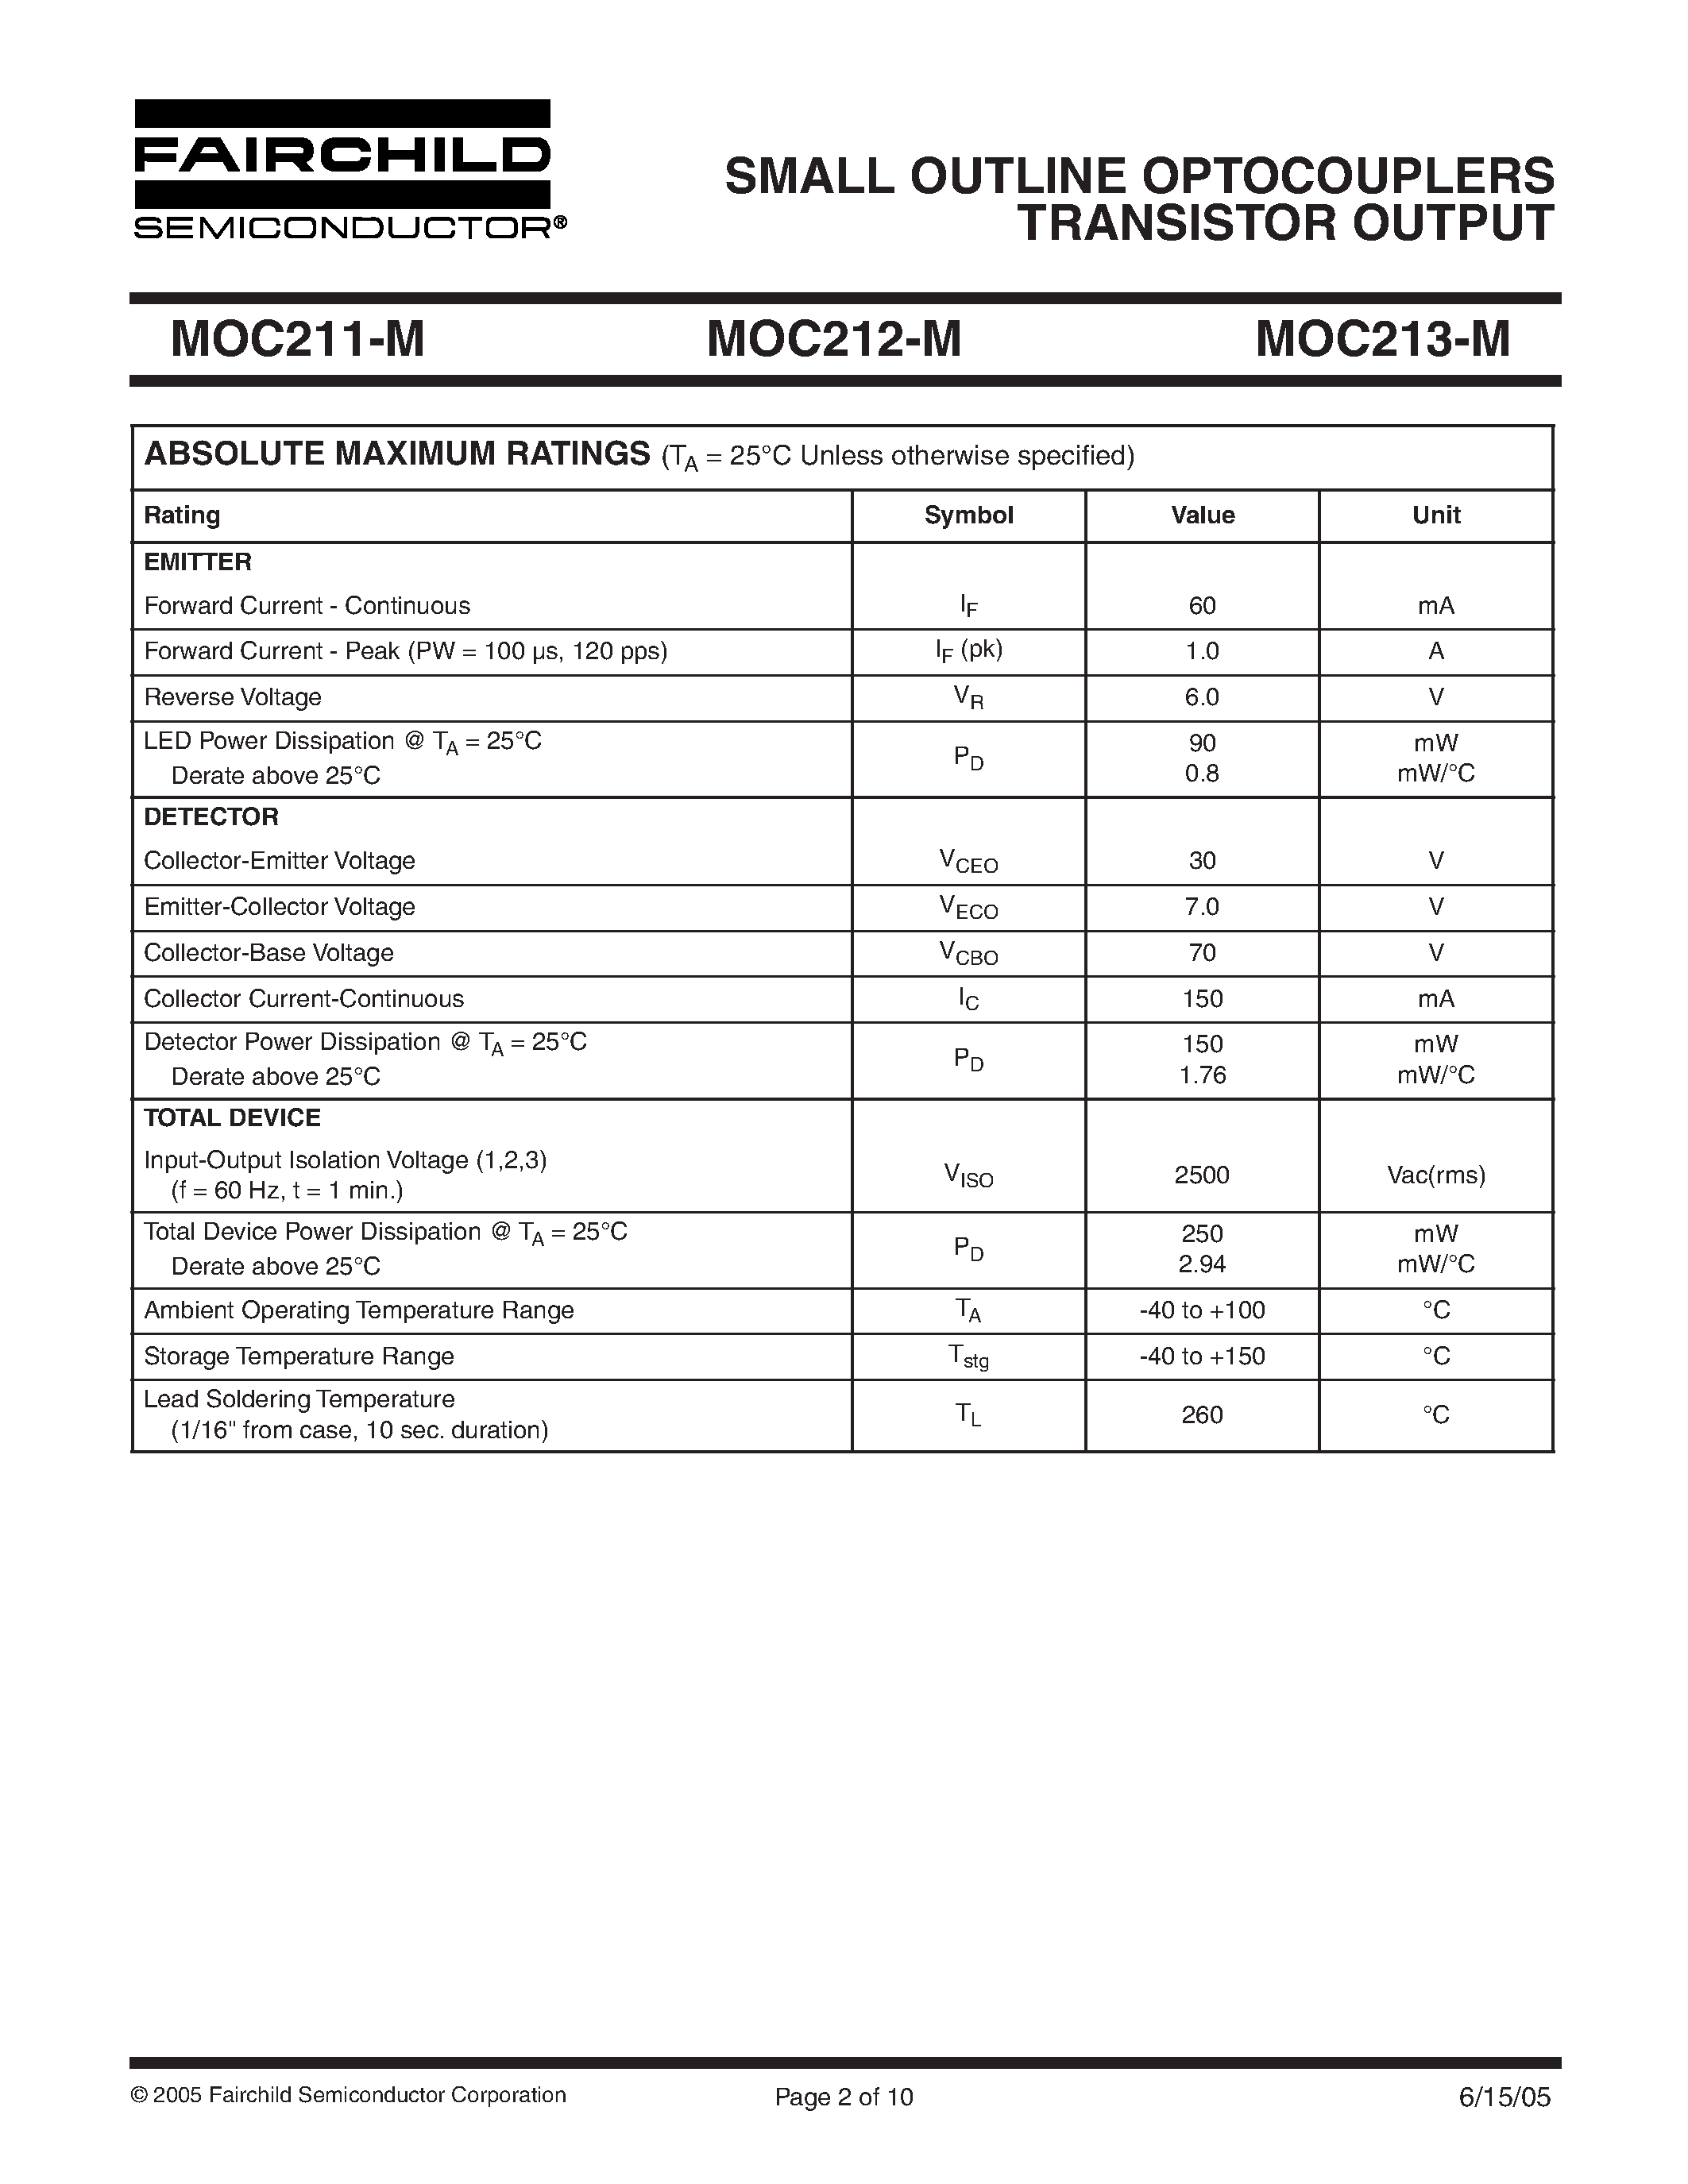 Datasheet MOC211-M - (MOC211-M - MOC213-M) SMALL OUTLINE OPTOCOUPLERS TRANSISTOR OUTPUT page 2